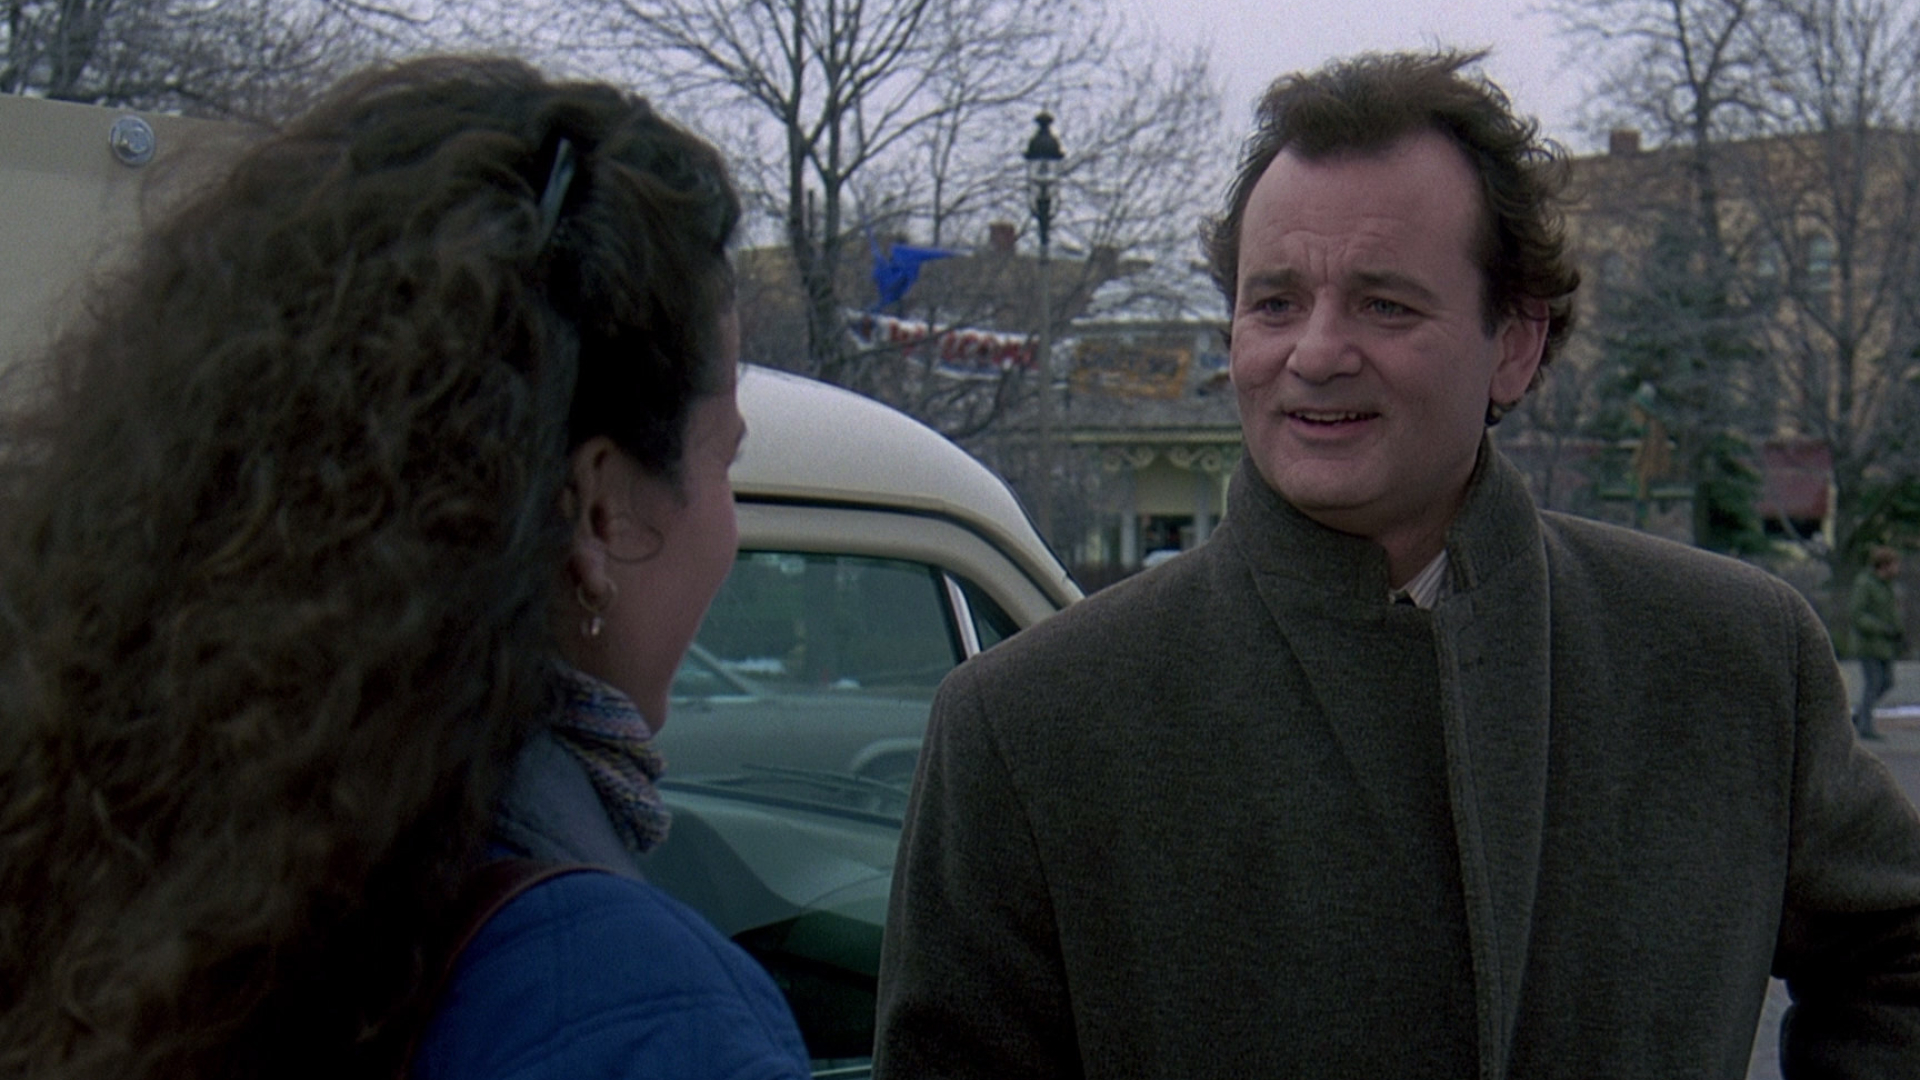 Groundhog Day (Movie): Bill Murray as Phil Connors and Andie MacDowell as Rita Hanson. 1920x1080 Full HD Wallpaper.